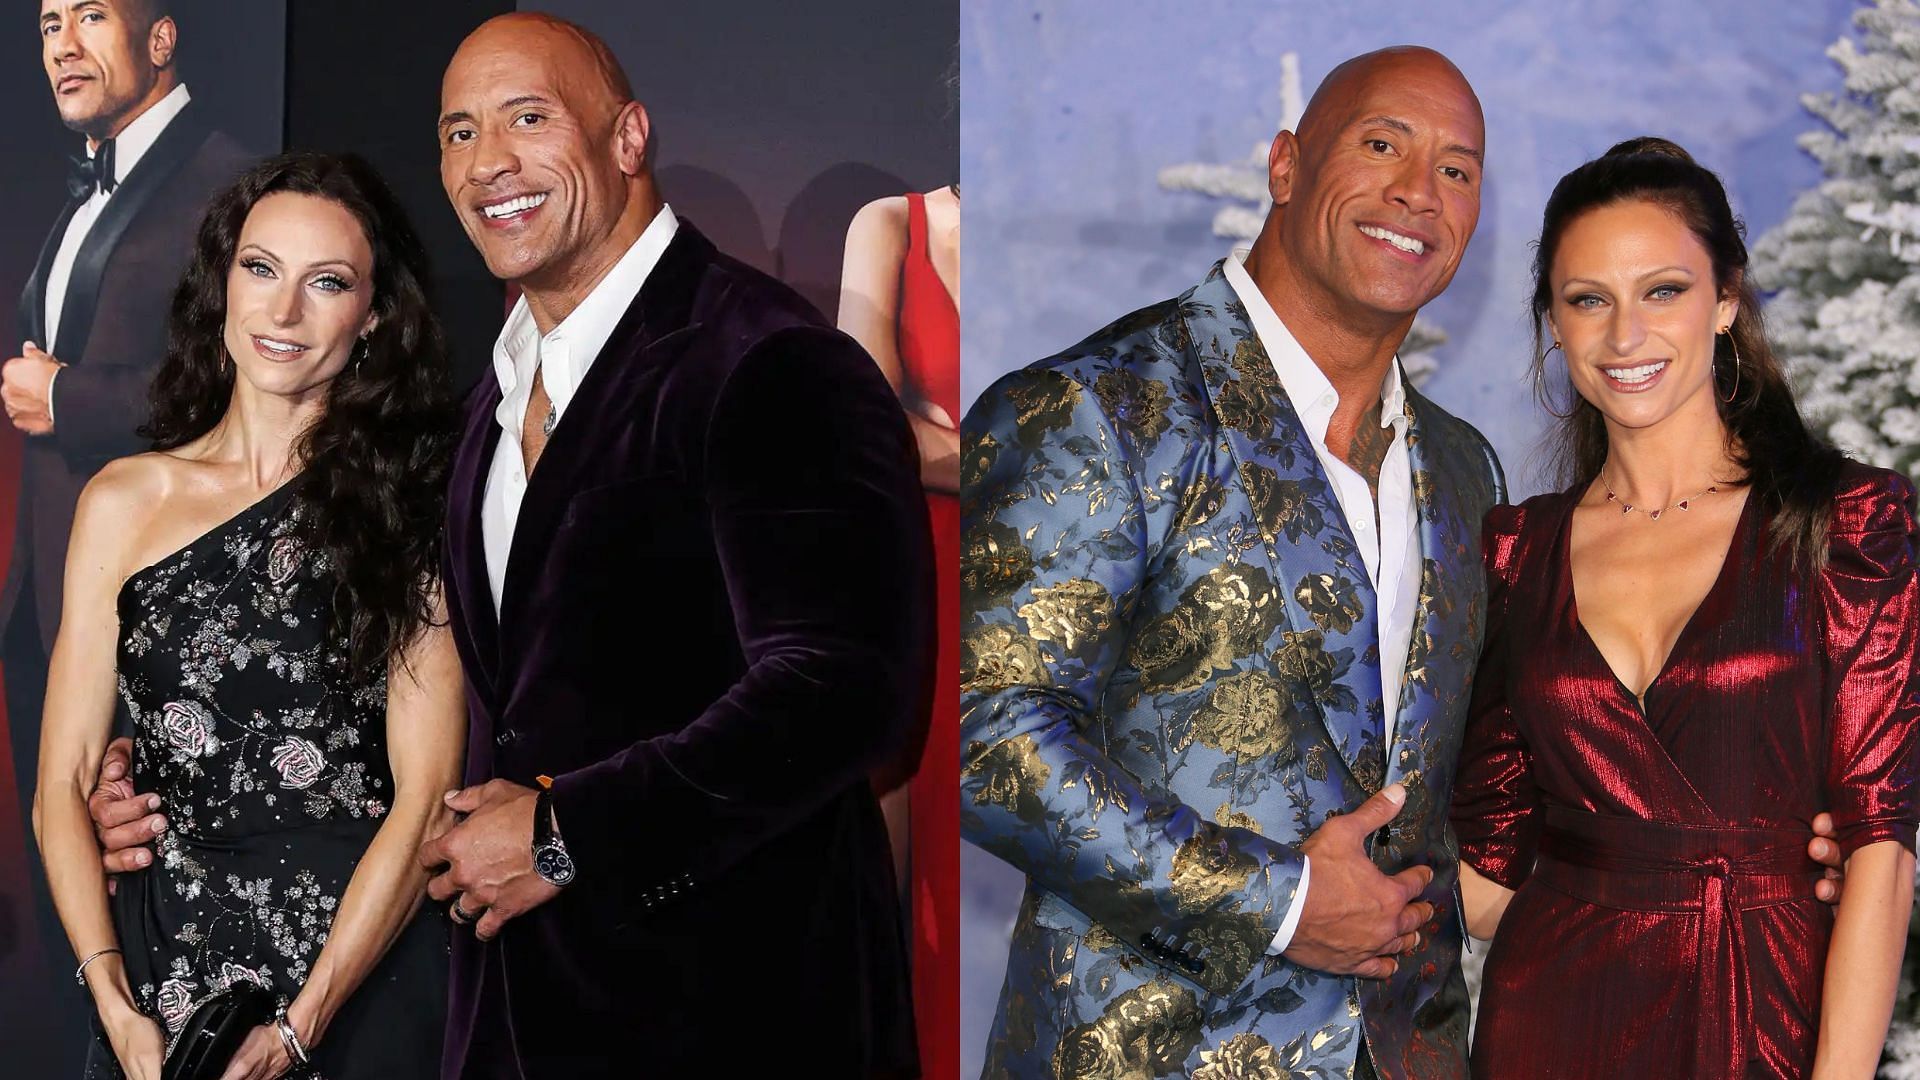 Hollywood actor Dwayne Johnson with his singer/song-writer wife Lauren Hashian